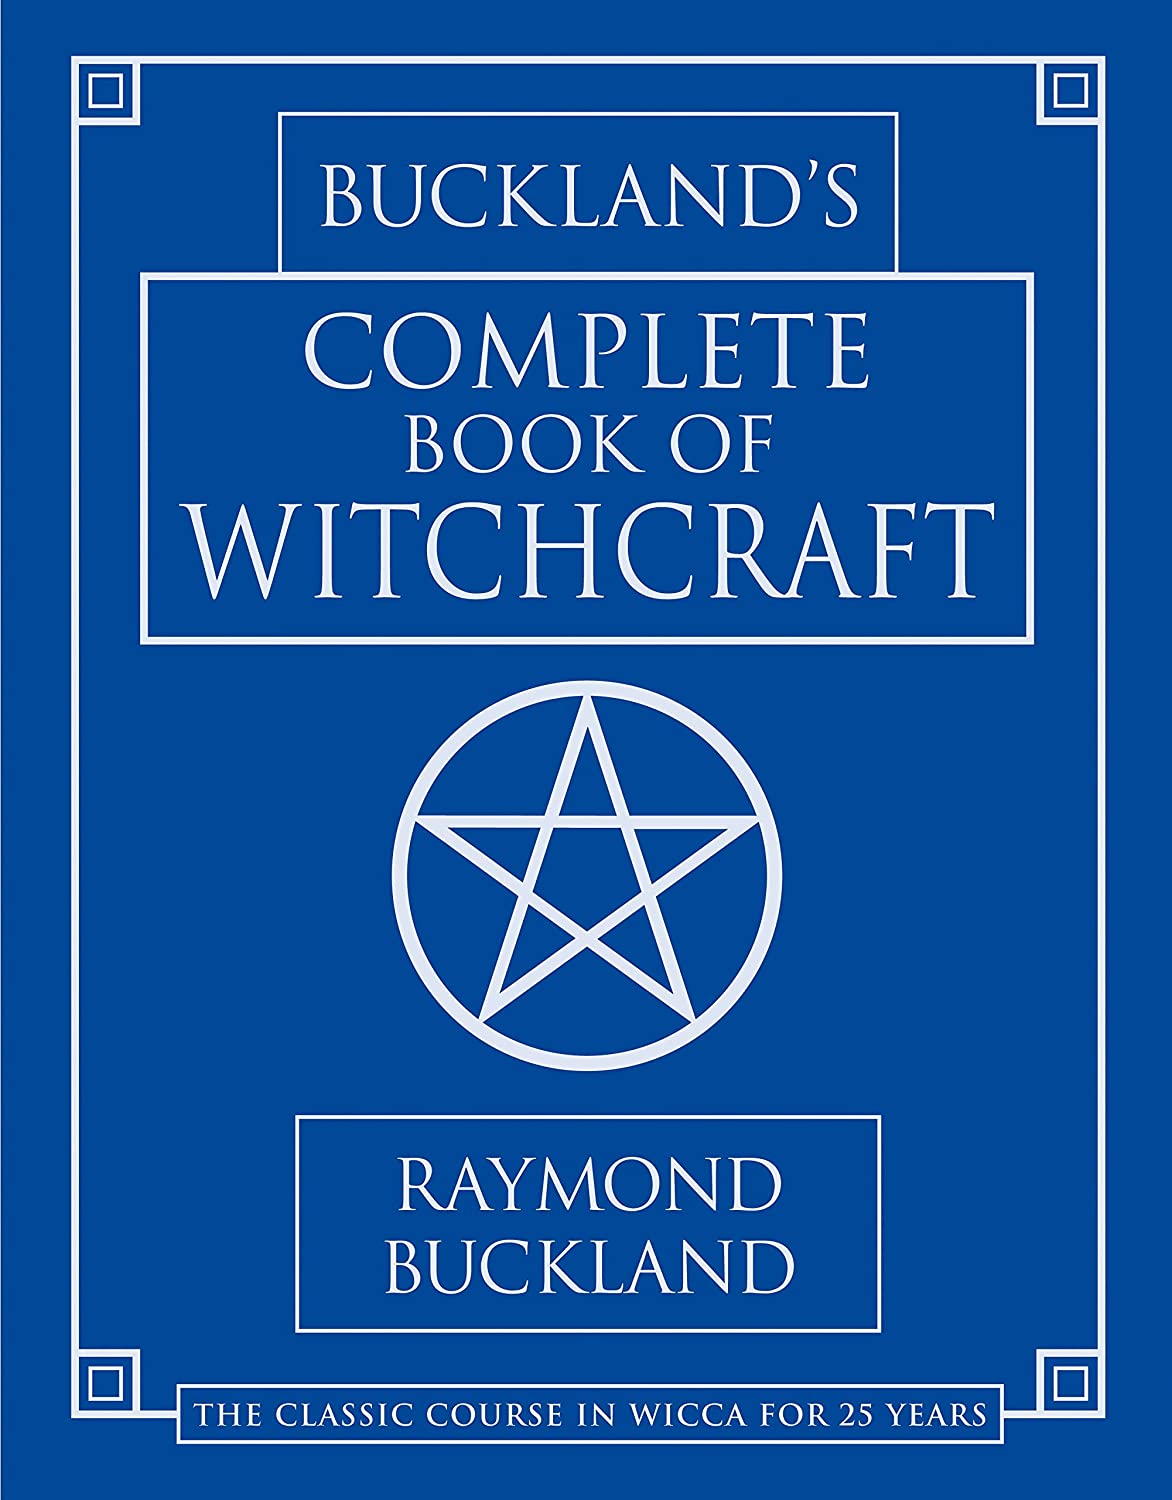 Buckland's Complete Book of Witchcraft; Raymond Buckland